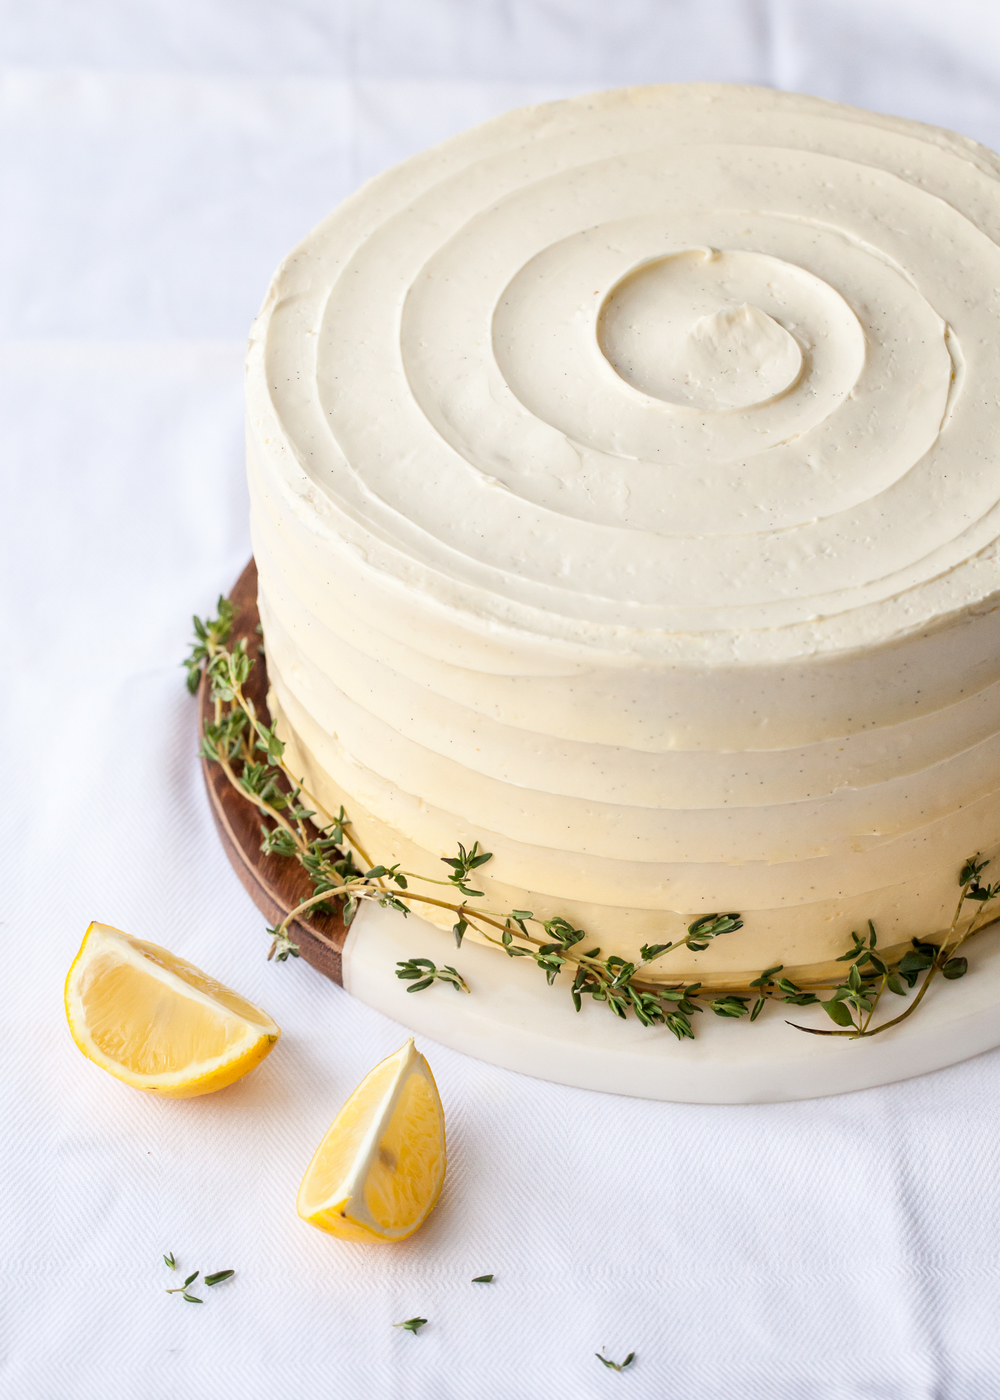 Lemon thyme cake with lemon curd buttercream and thyme syrup.